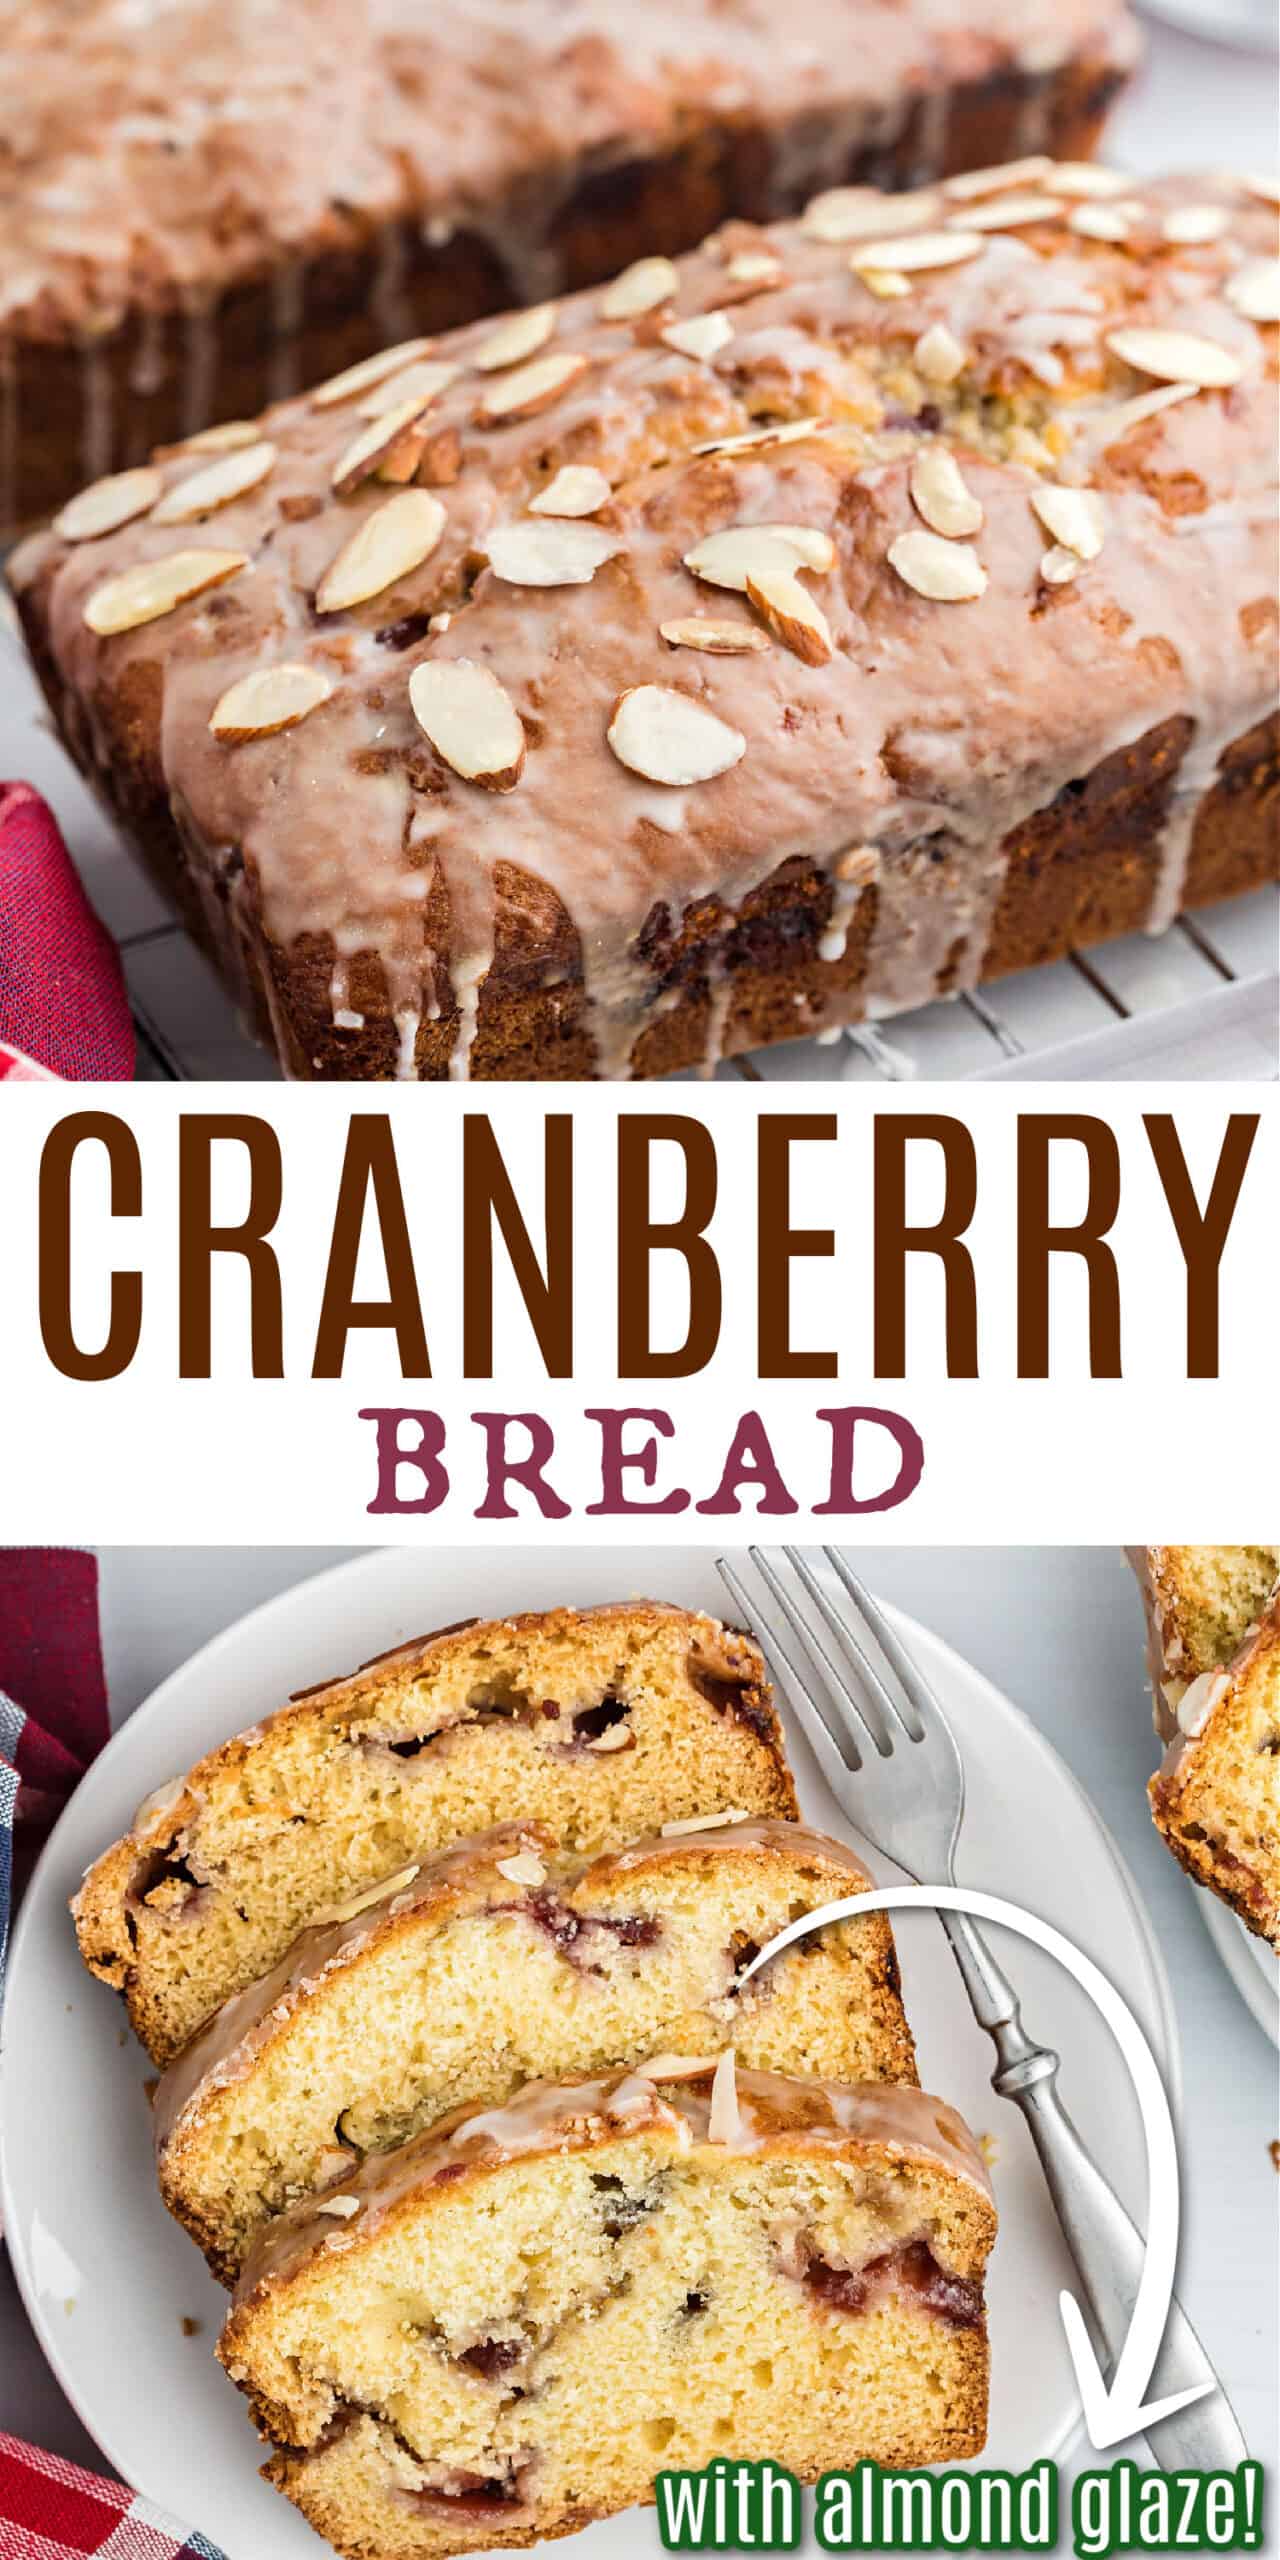 Cranberry Almond Bread Recipe - Shugary Sweets